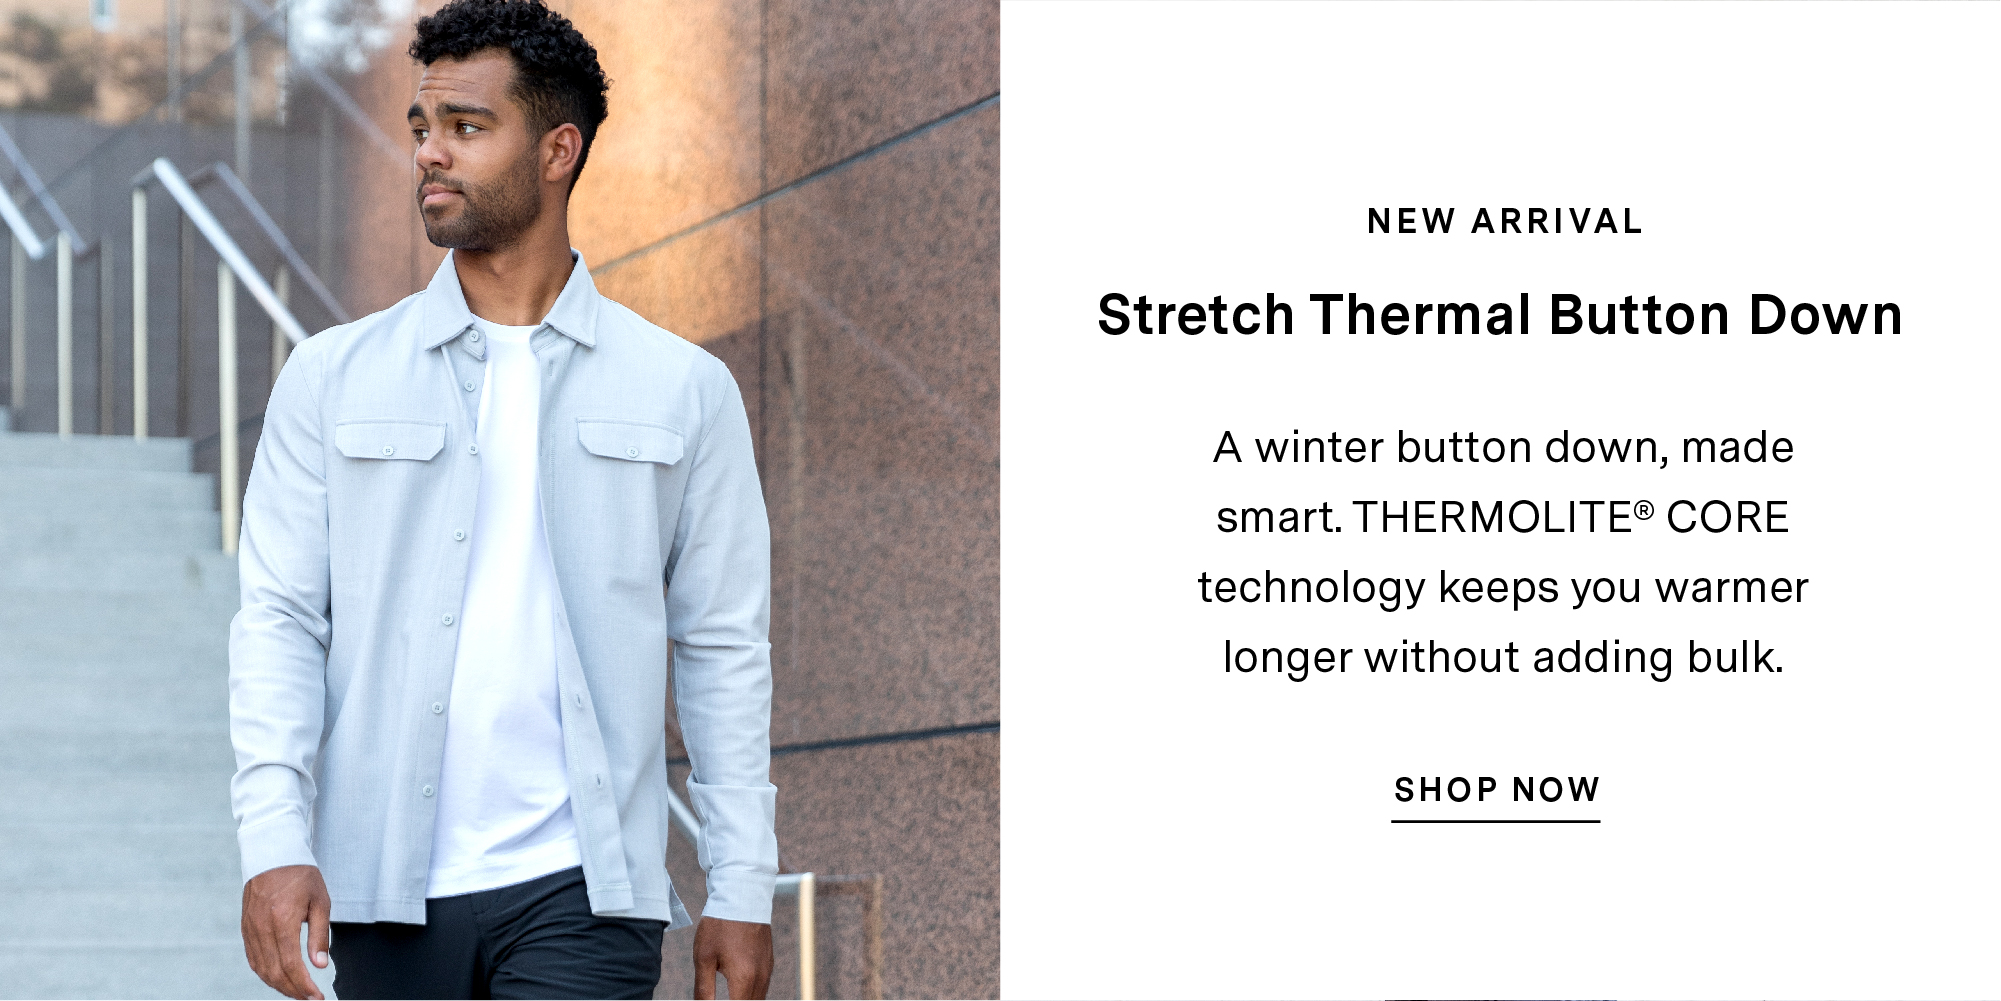 NEW ARRIVAL. Stretch Thermal Button Down. A winter button down, made smart. THERMOLITE? CORE technology keeps you warmer longer without adding bulk. SHOP NOW